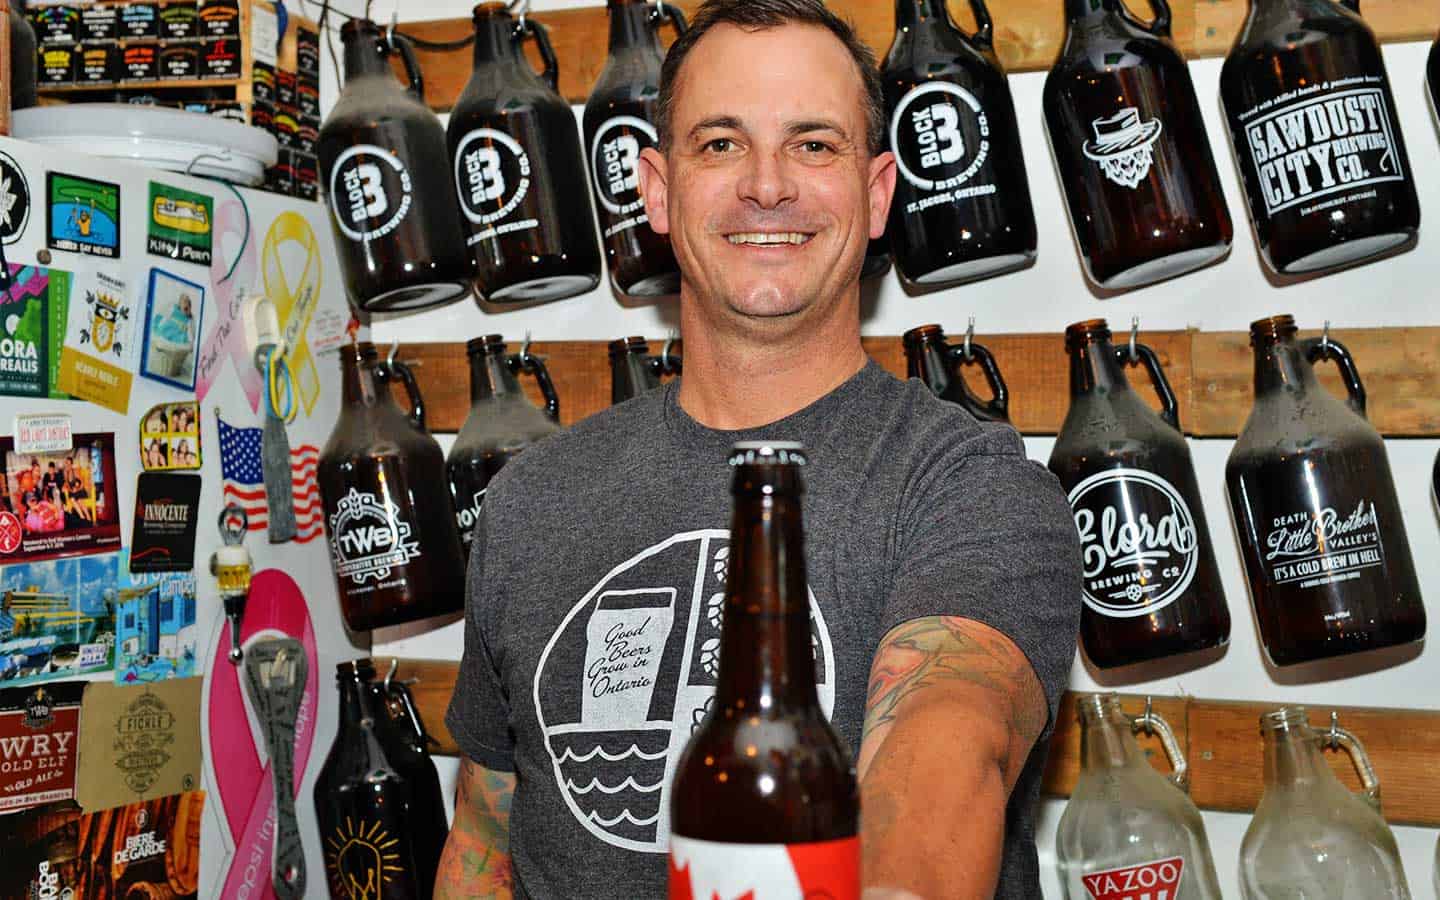 Serving up a local take on craft brewing